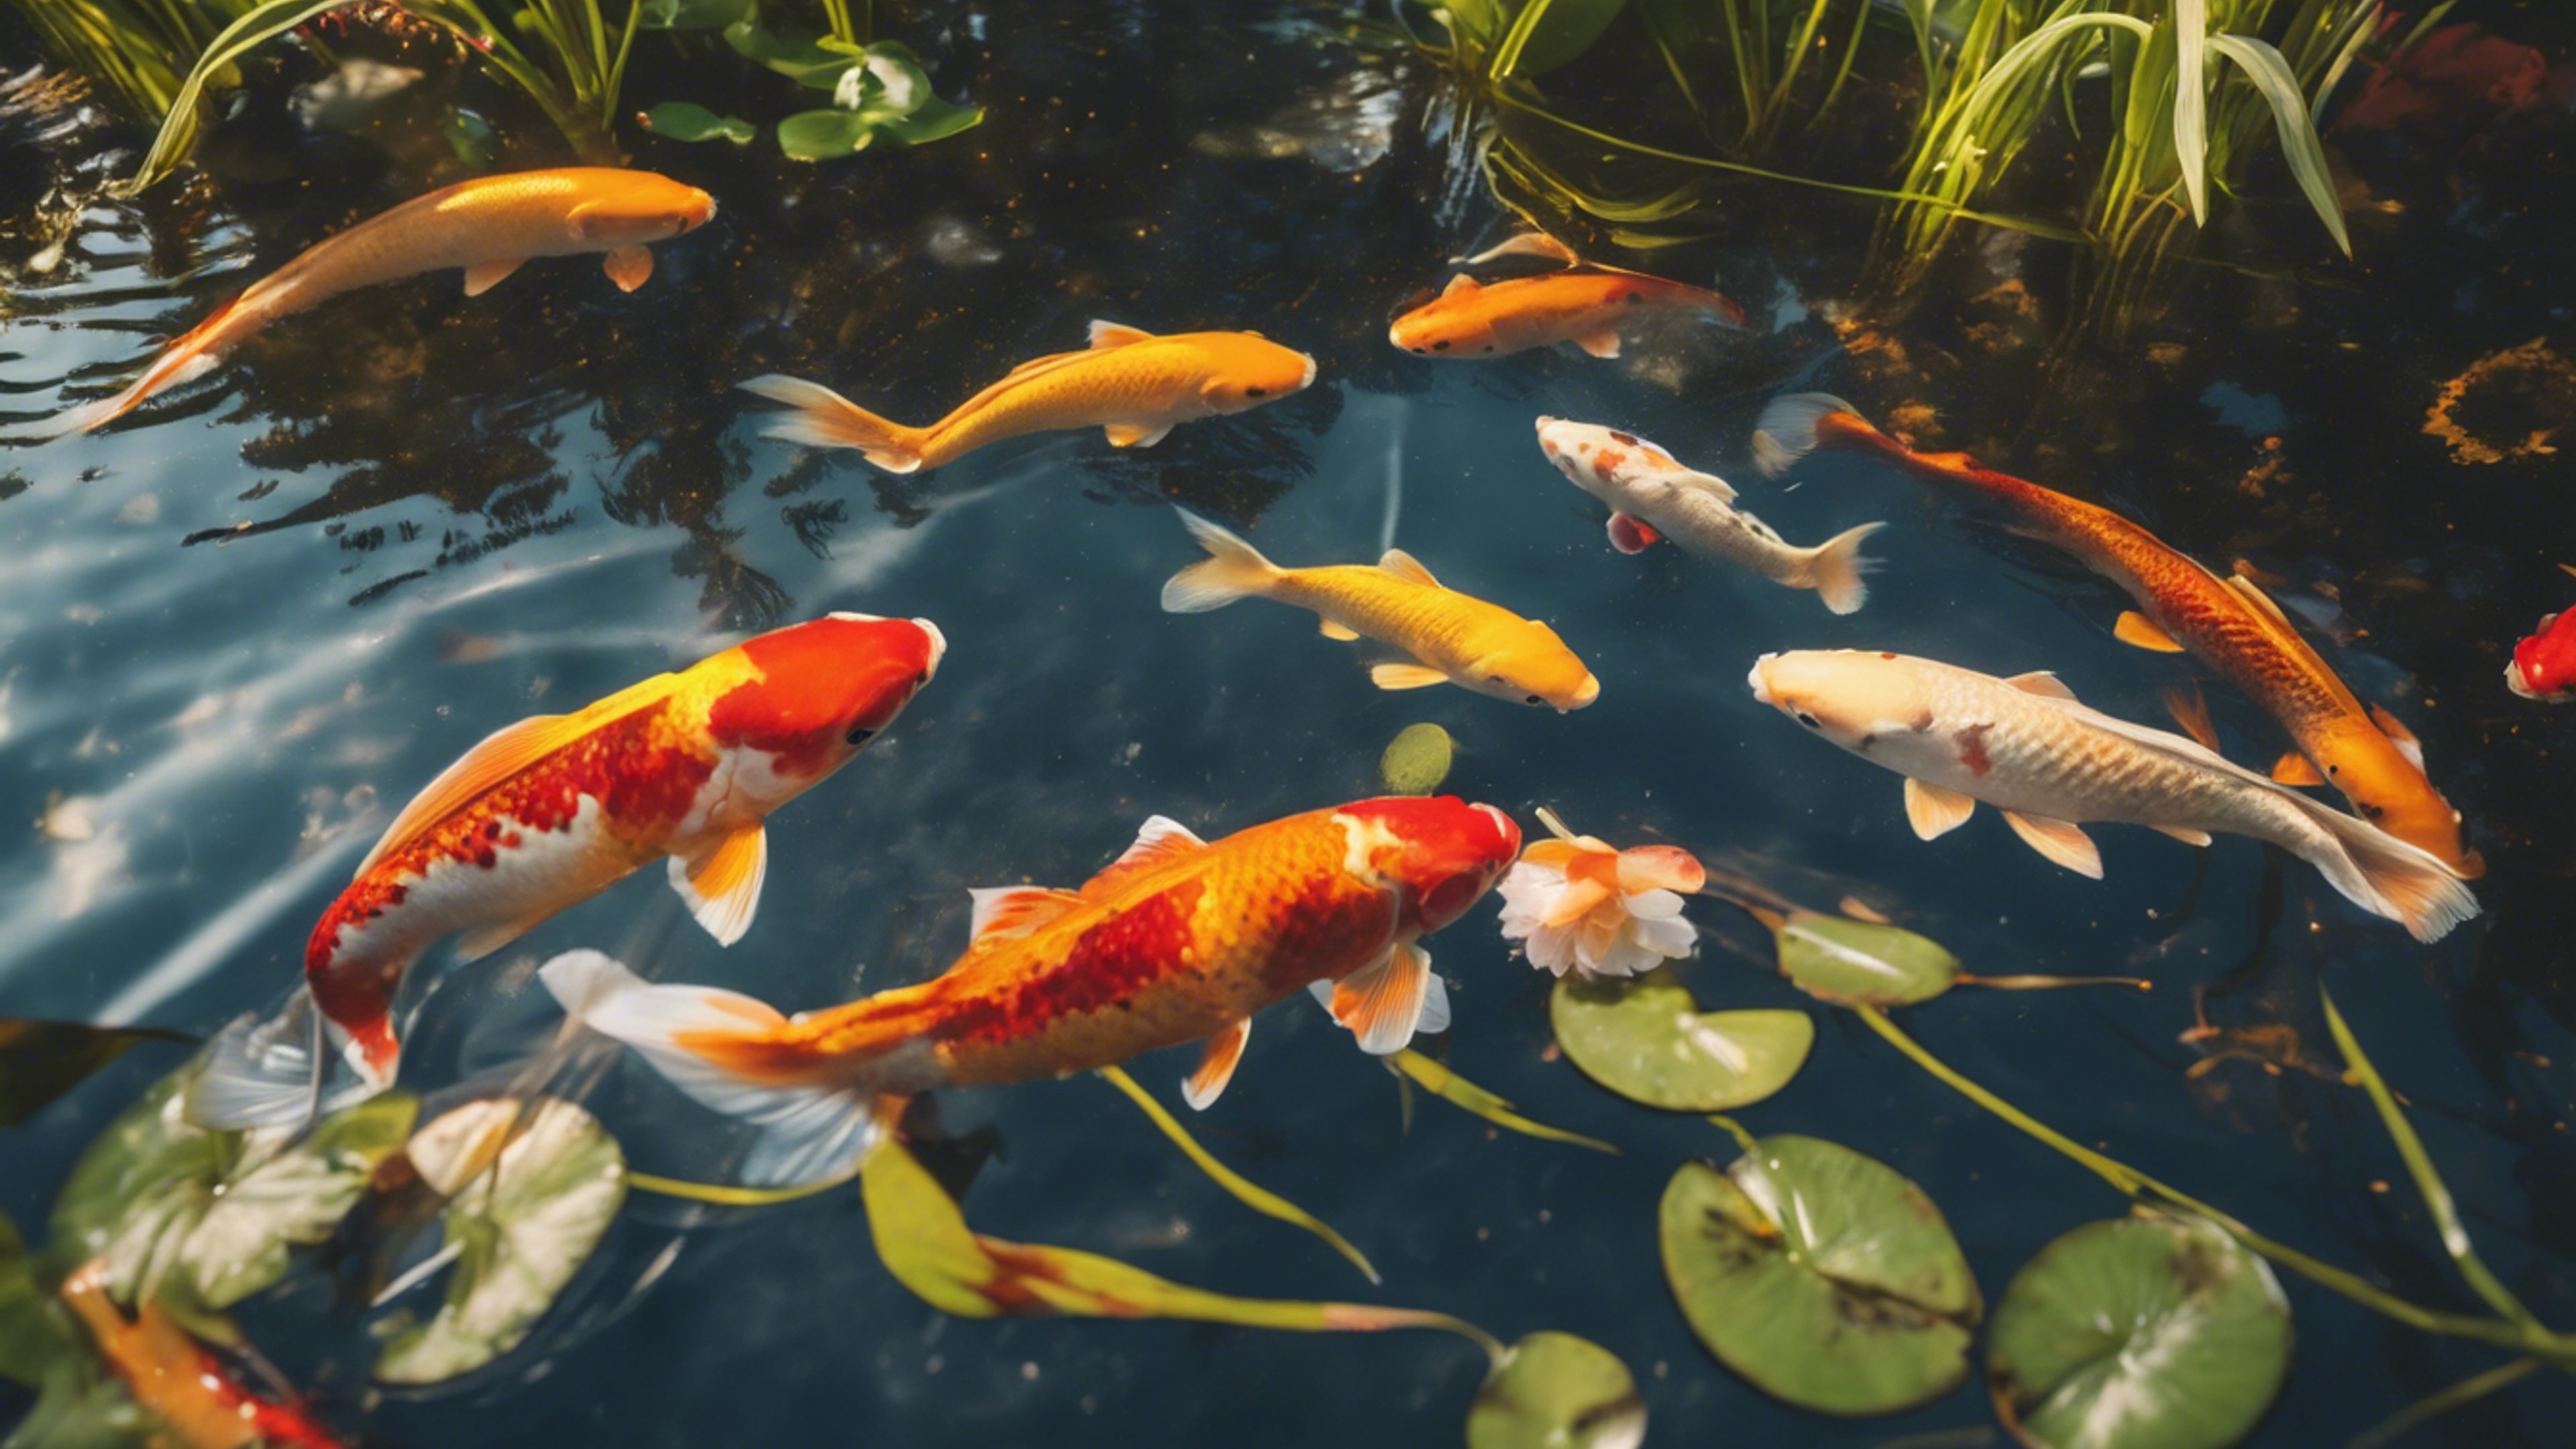 A koi pond with fish swirling under the lilies, their cool red and vibrant yellow scales shimmering under the sun. Tapet[e1c53d91cfb64fffb364]